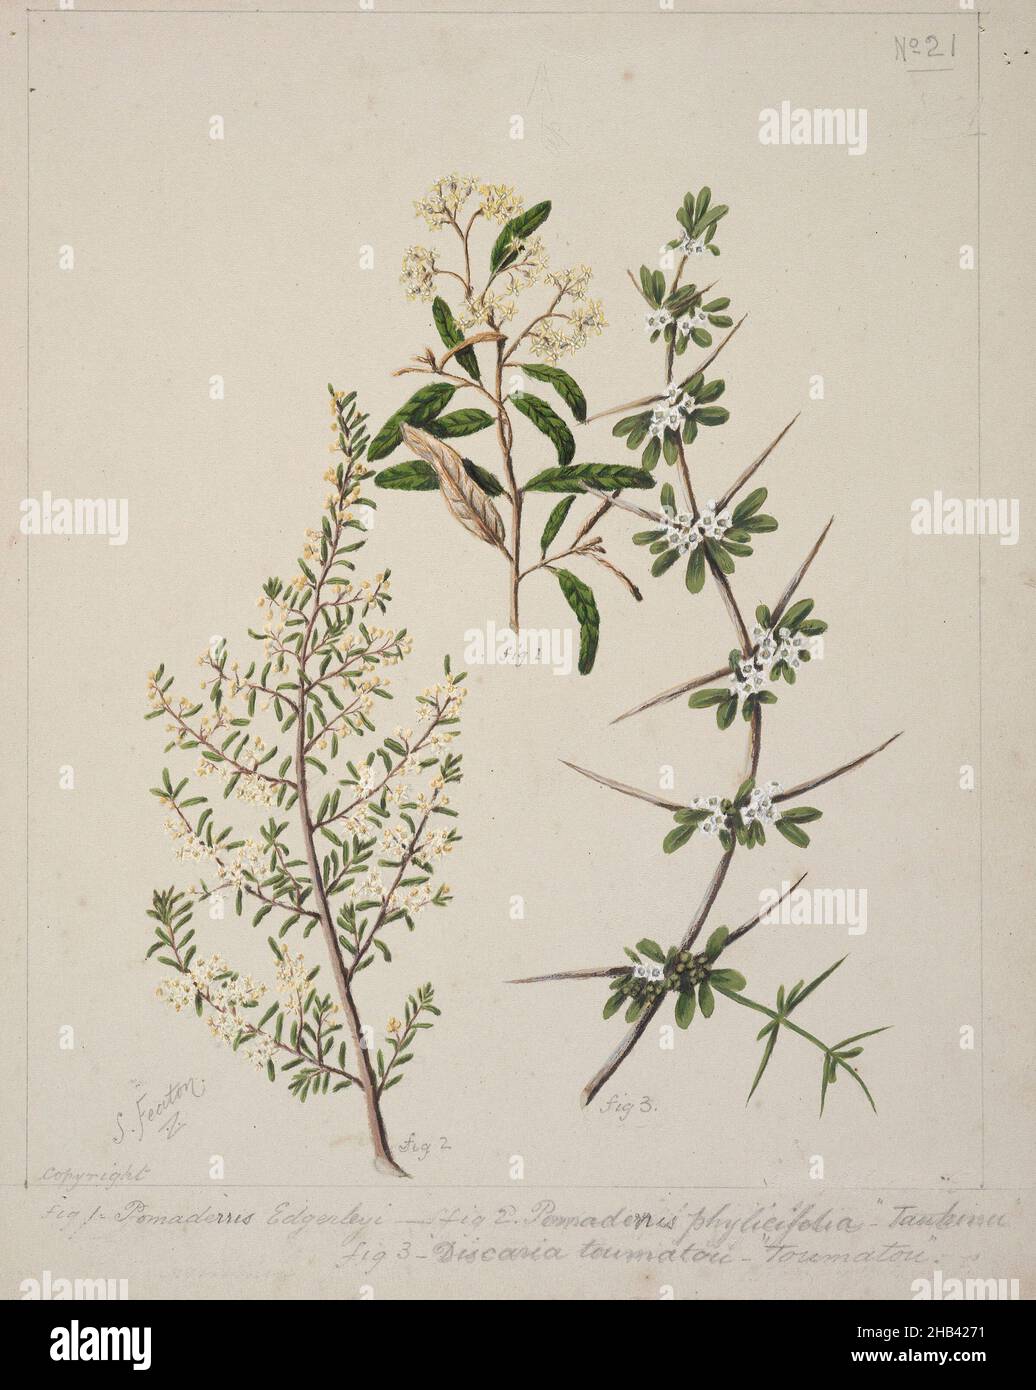 [Pomadrris edgerloyi, Pomaderris phylicifolia 'Tauhinu', Discaria toumatu 'Toumatou'], Sarah Featon, circa 1885, New Zealand, In 1889 Sarah Featon and her husband Edward Featon published The Art Album of New Zealand Flora, in which they sought to dispute the ‘mistaken notion that New Zealand is peculiarly destitute of native flowers’. While the title emphasises the artistic nature of their enterprise, in the preface they describe the choice they made between selecting a handful of the ‘best and most showy representatives of indigenous flowers’ and publishing them in a ‘haphazard manner Stock Photo